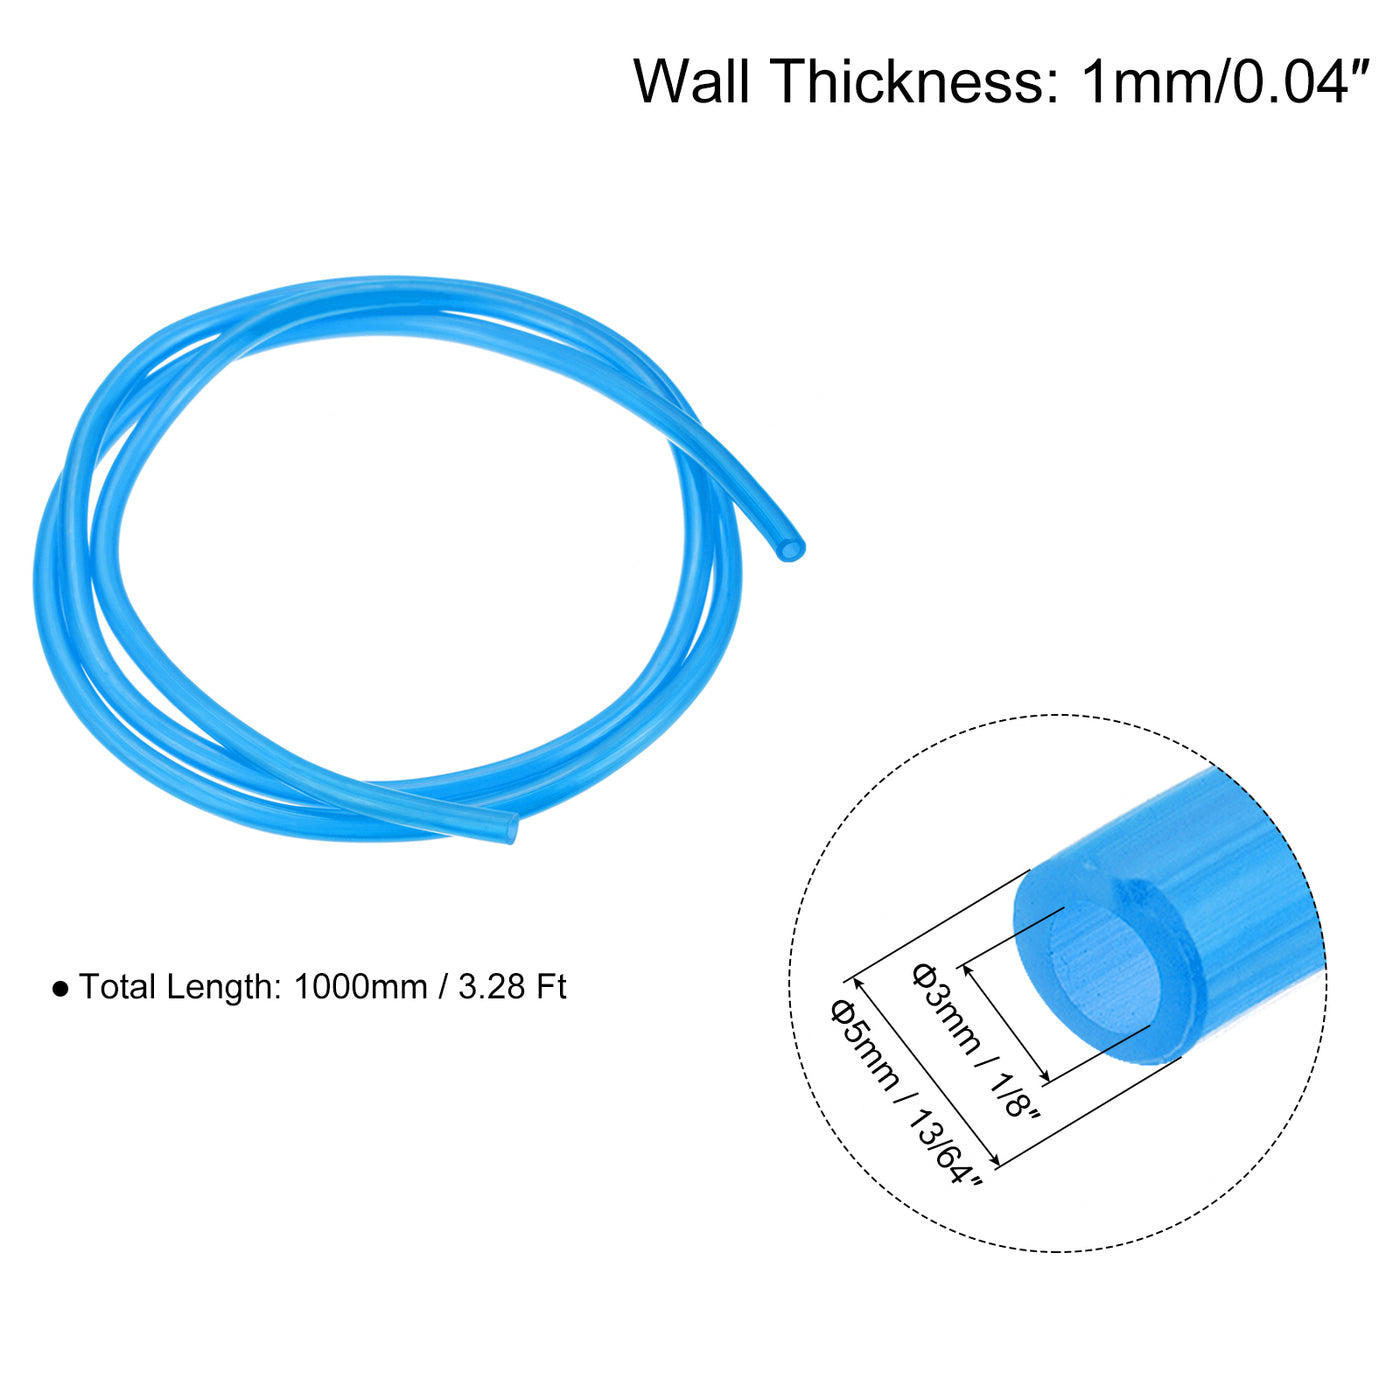 uxcell Uxcell Color Hose Tubing 1/8" ID, 13/64" OD 1Pcs 3.28 Ft for Pump Transfer, Blue